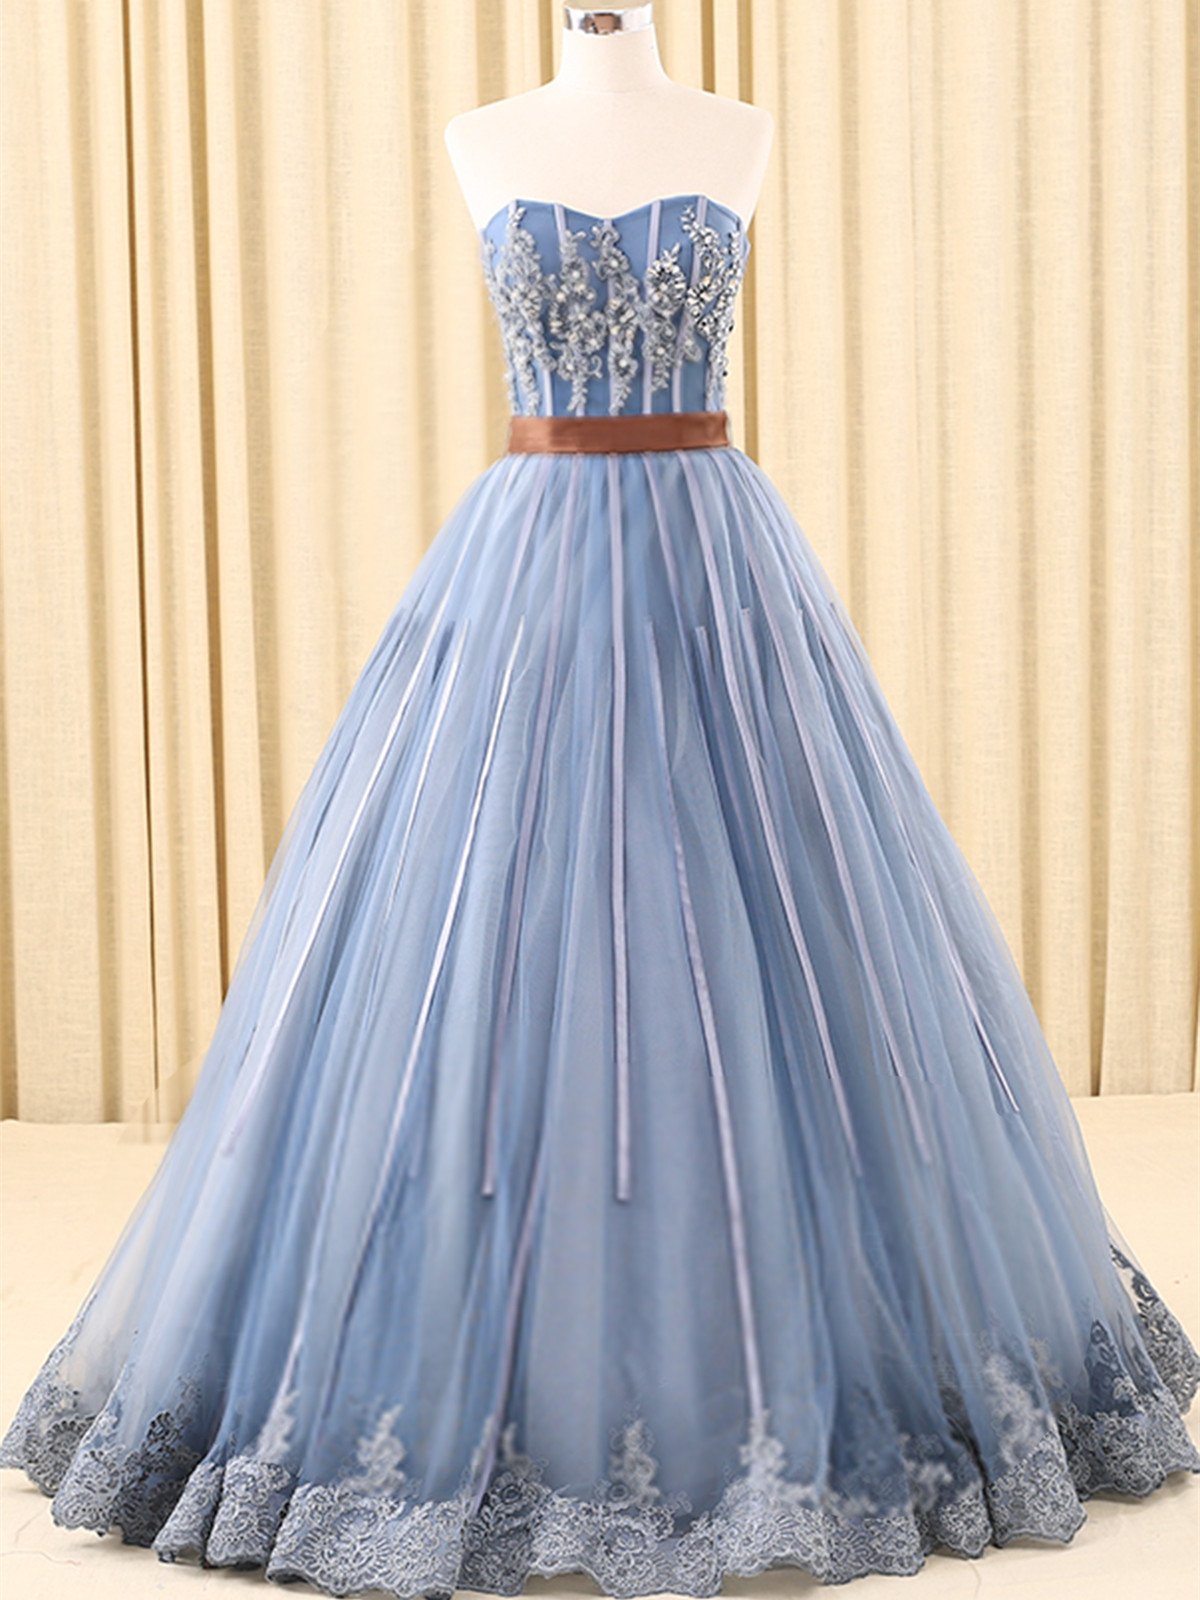 Glamorous Ball Gown Prom Dress,Sweetheart Long Prom Dresses,Evening Dress With Appliques